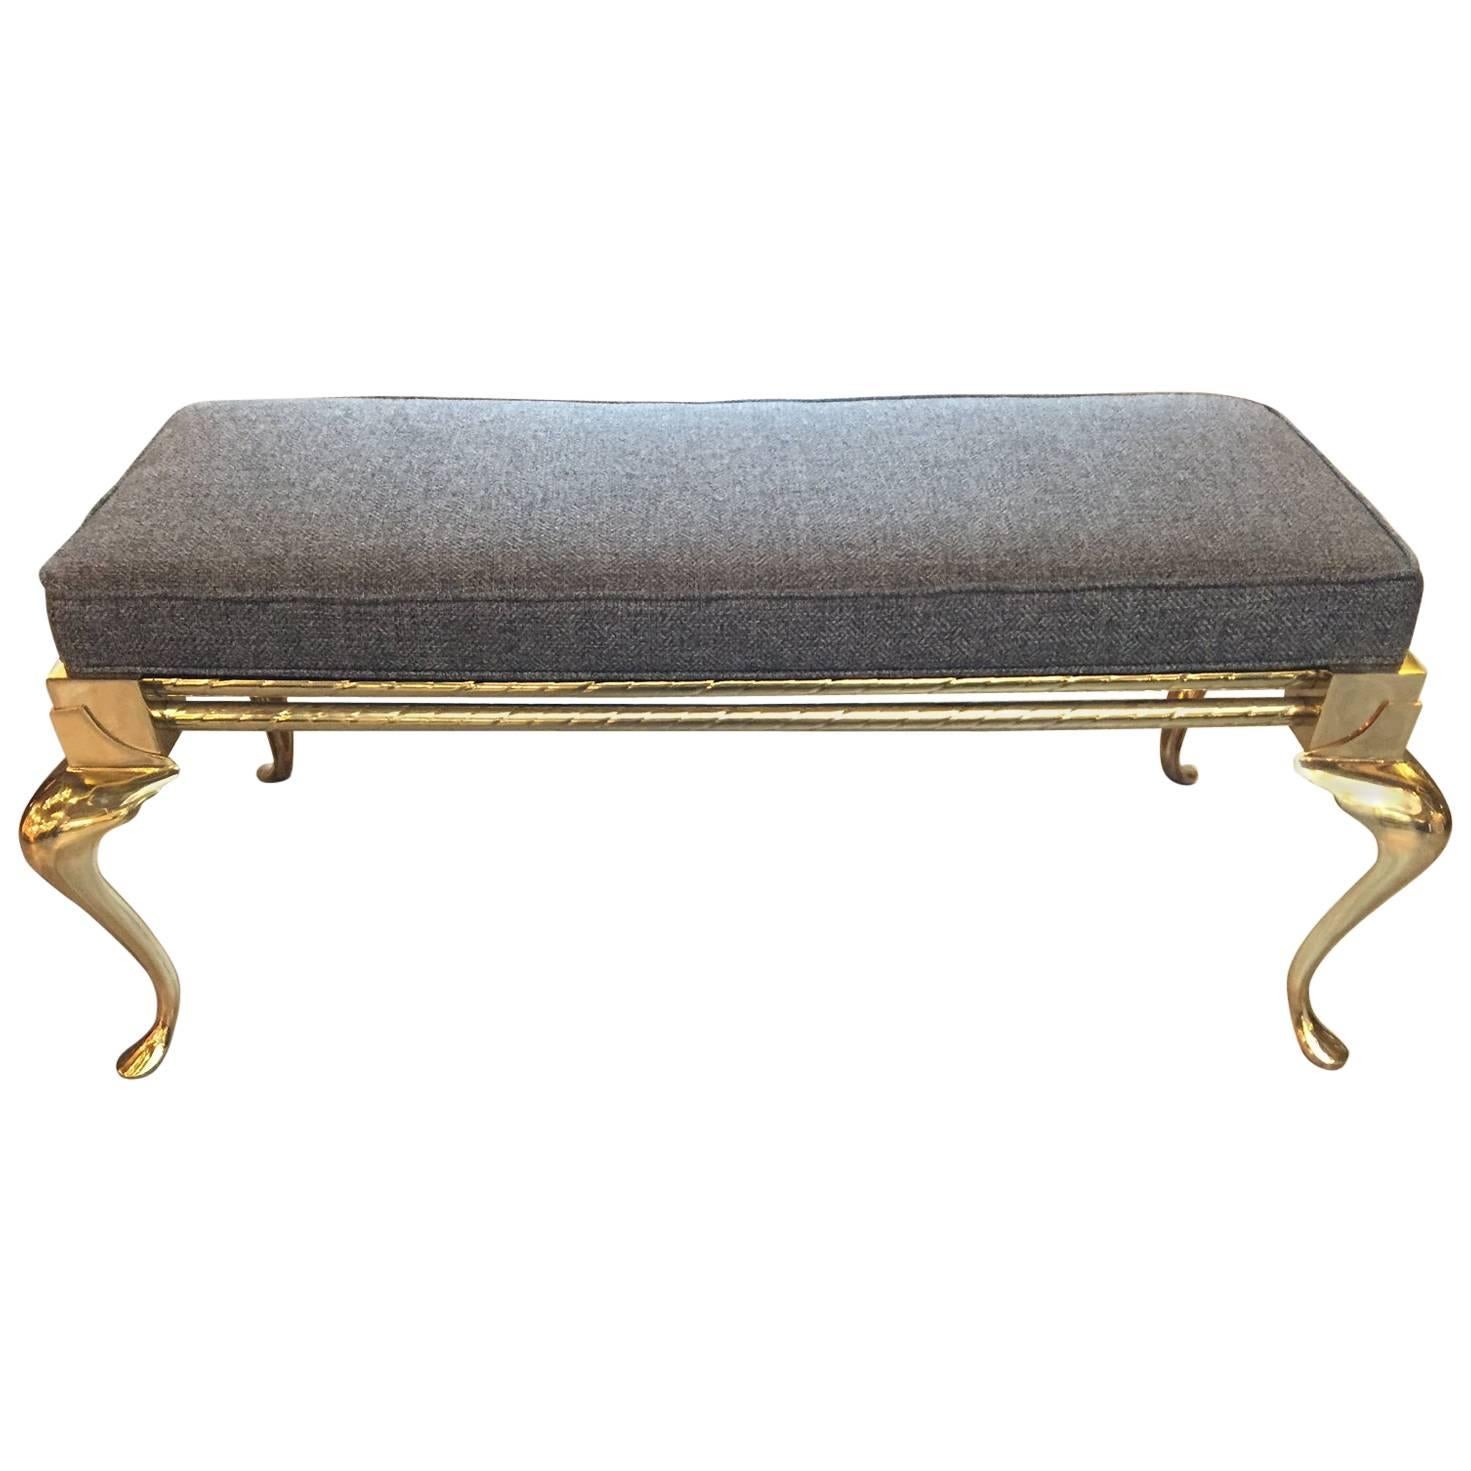 Stunning Solid Brass Bench with Handsome Grey Upholstered Cushion